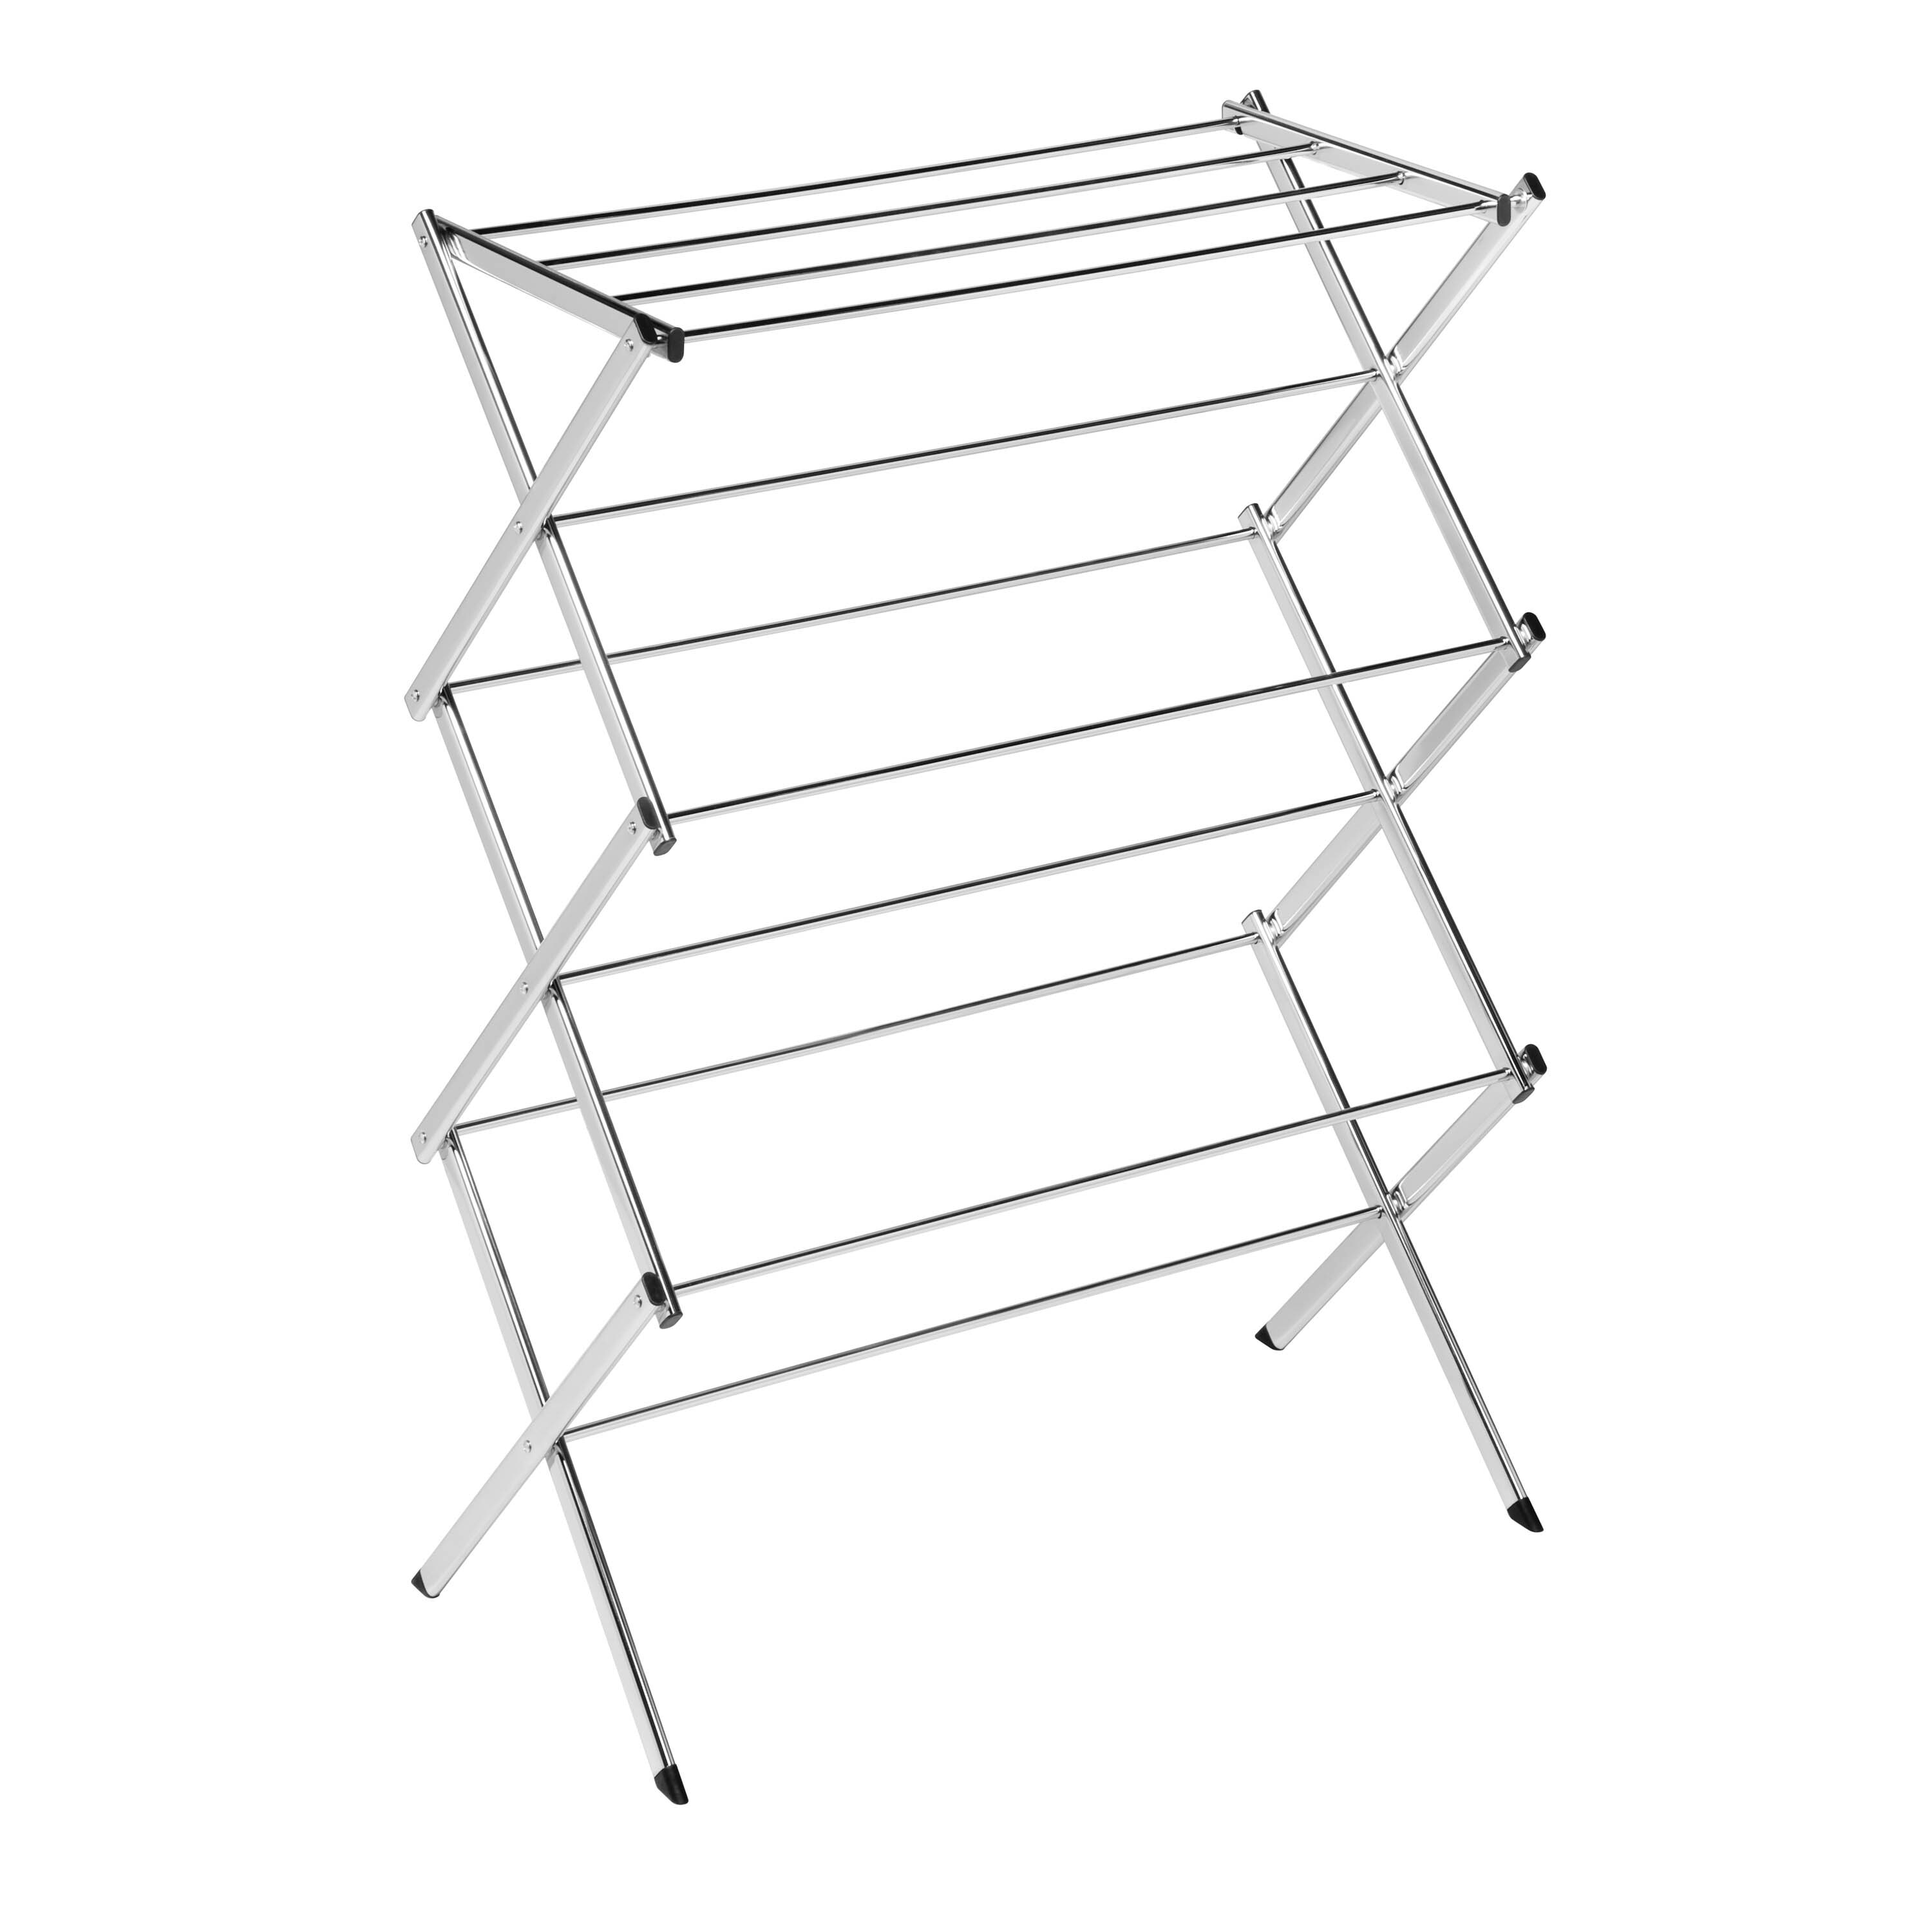 Buy Clothes Drying Stands , 3 Tier Collapsible Rolling Dryer Clothes Hanger  Rack Rail Stand with Side Wings, Stainless Steel Clothes Airer for Laundry,  Sky Blue, [Made in India] 2 Year Manufacturer